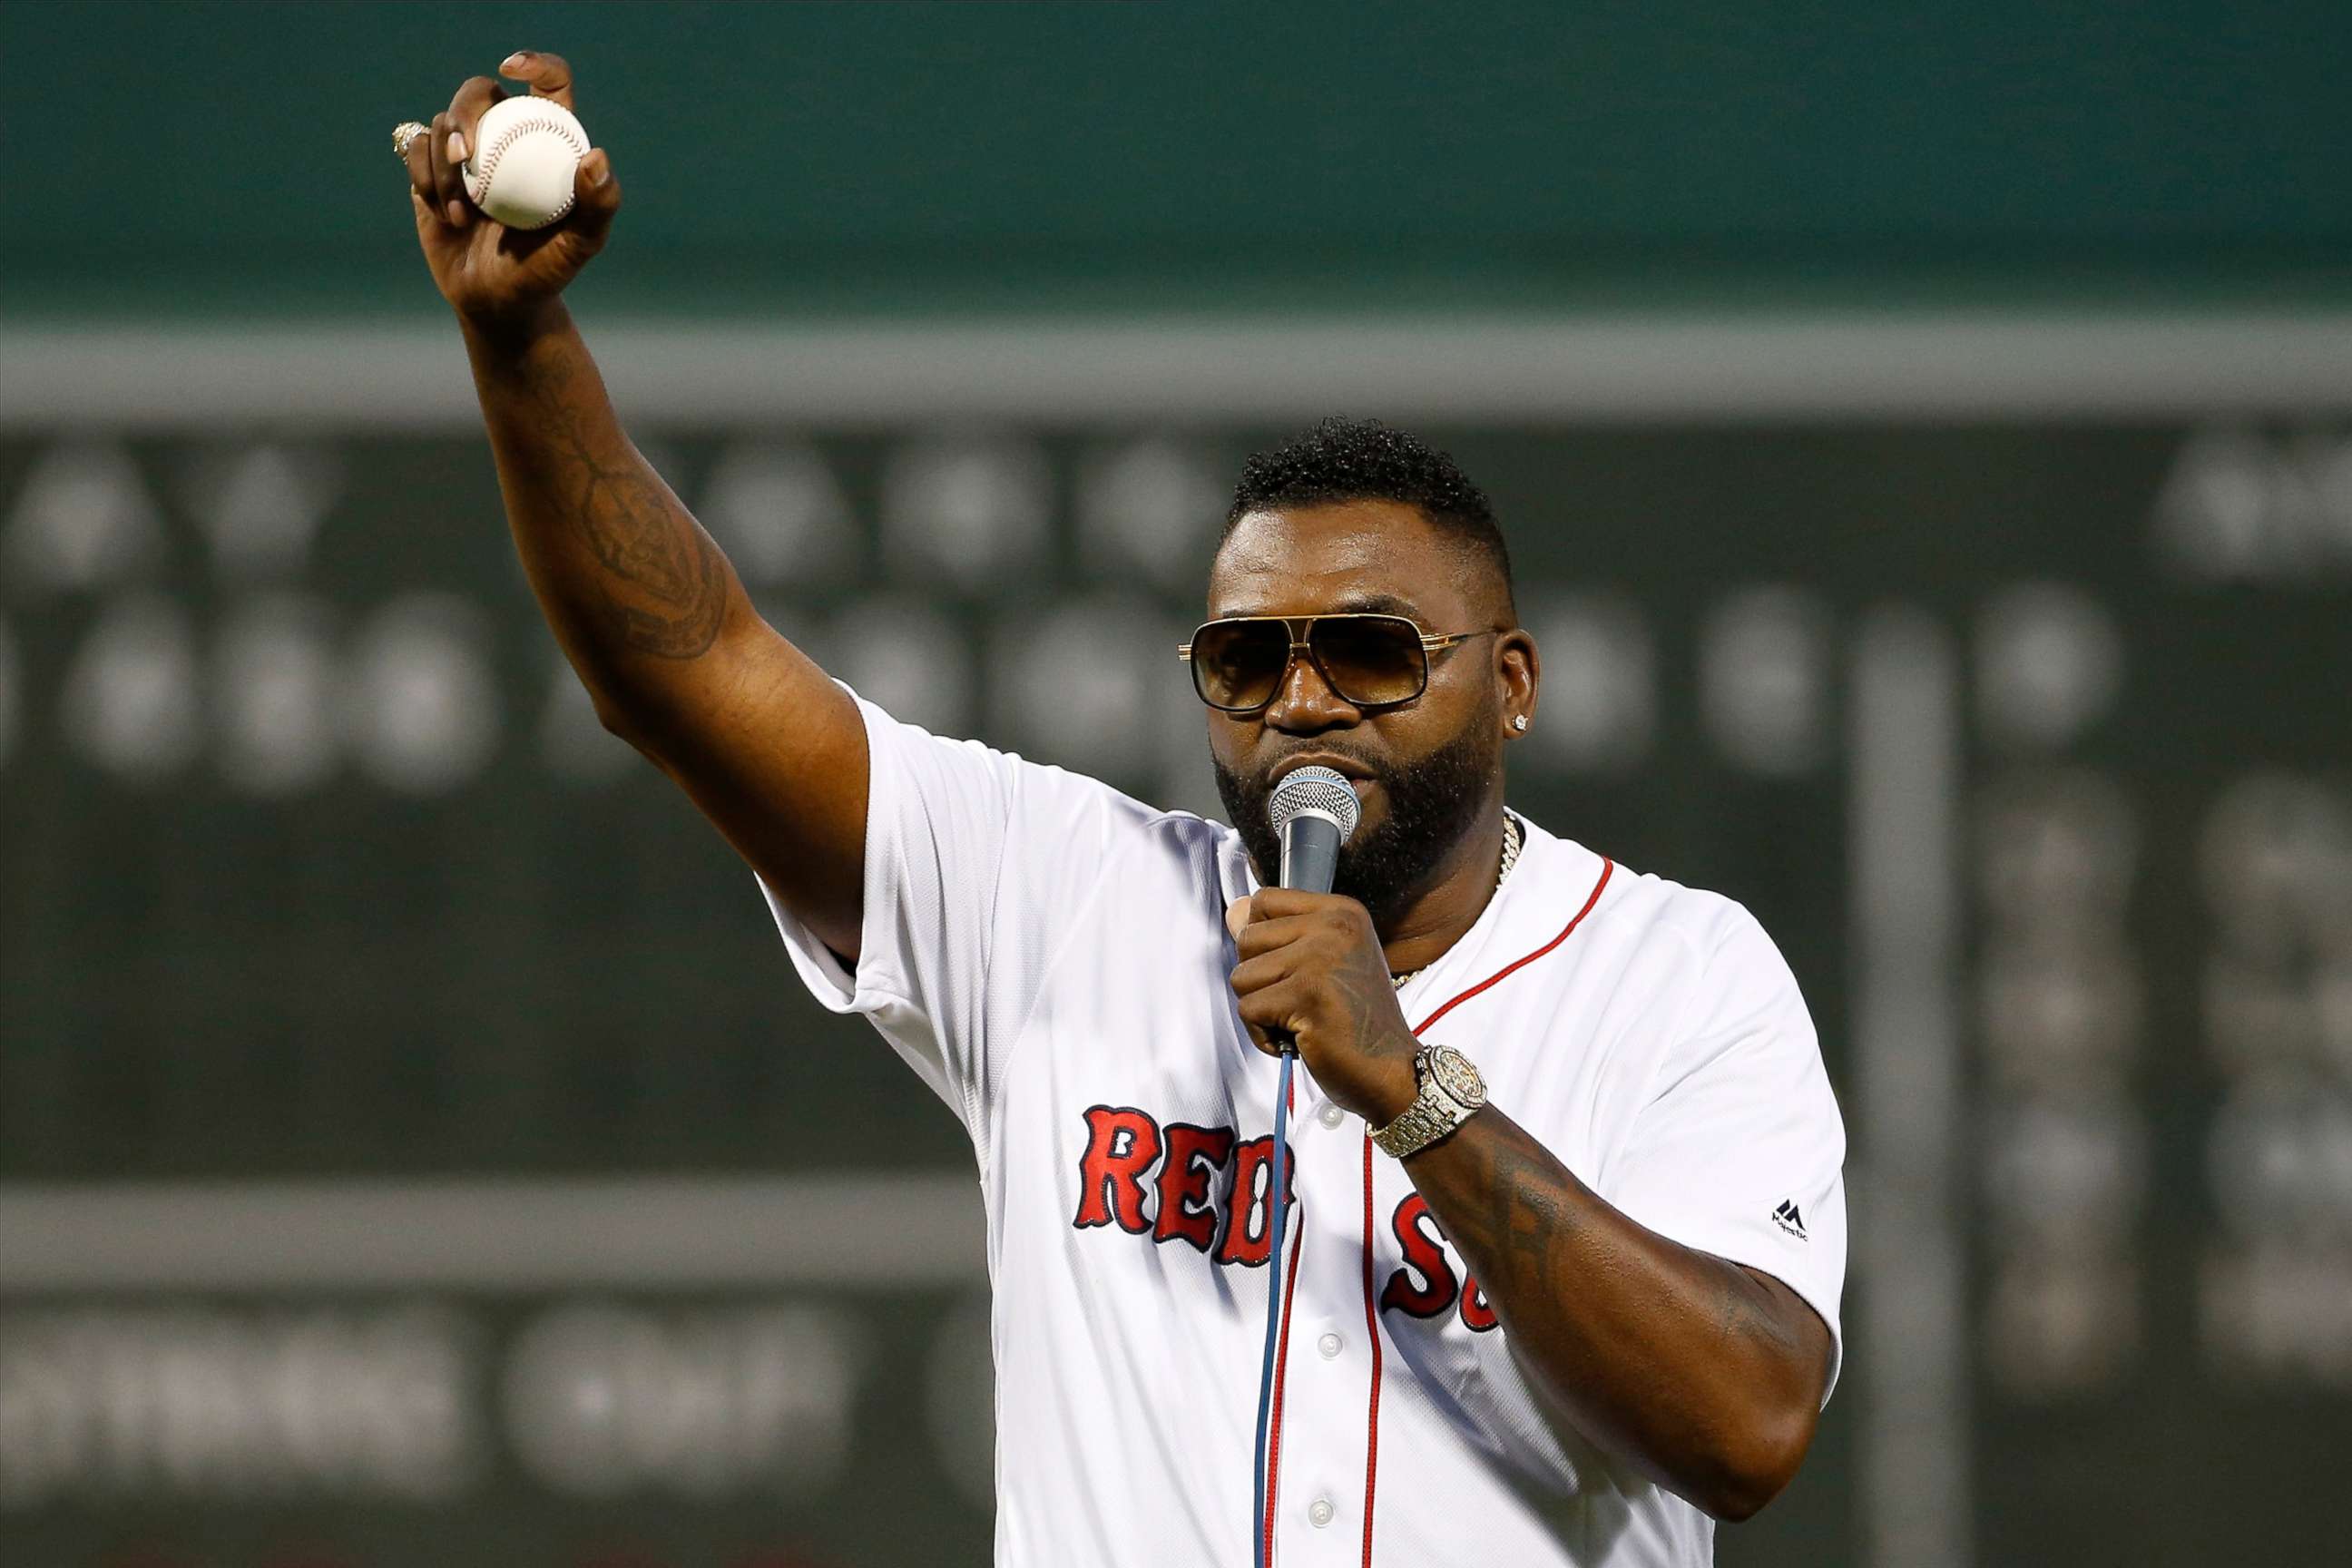 PHOTO: Former Boston Red Sox player David Ortiz talks to the crowd after throwing out the ceremonial first pitch before the game against the New York Yankees at Fenway Park in Boston, Sep 9, 2019.